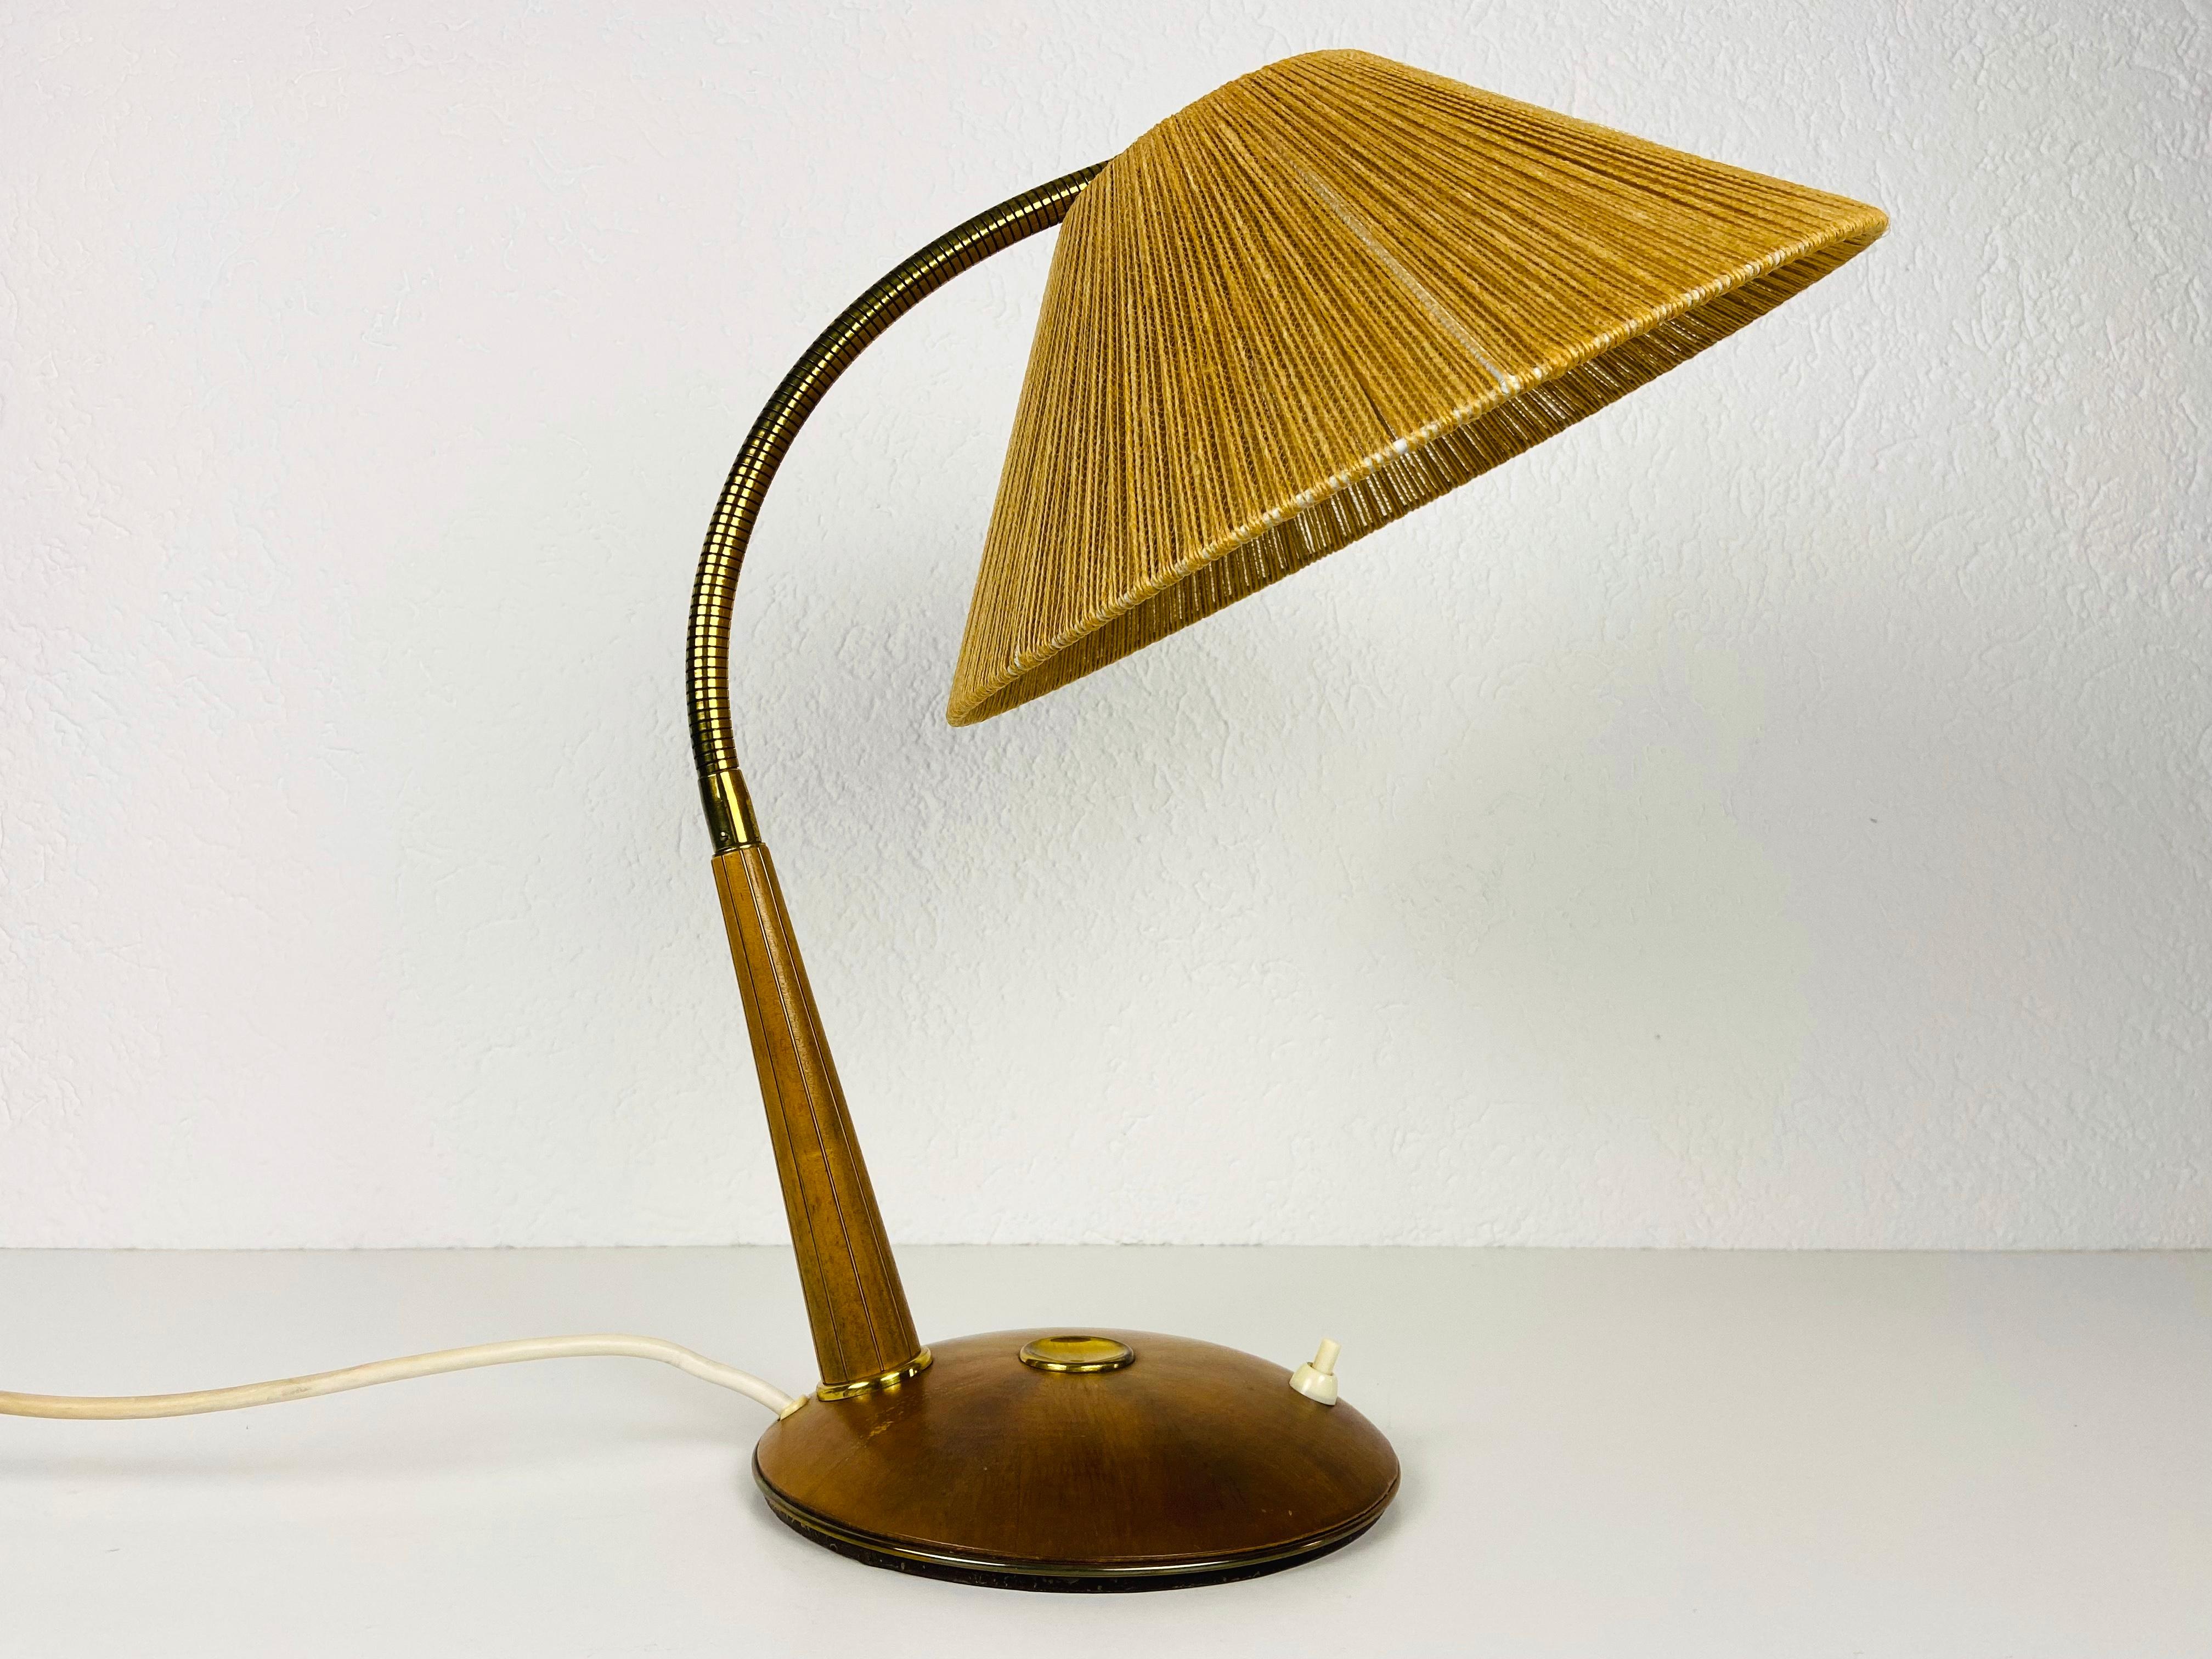 Midcentury Teak and Rattan Table Lamp by Temde, circa 1970 For Sale 2